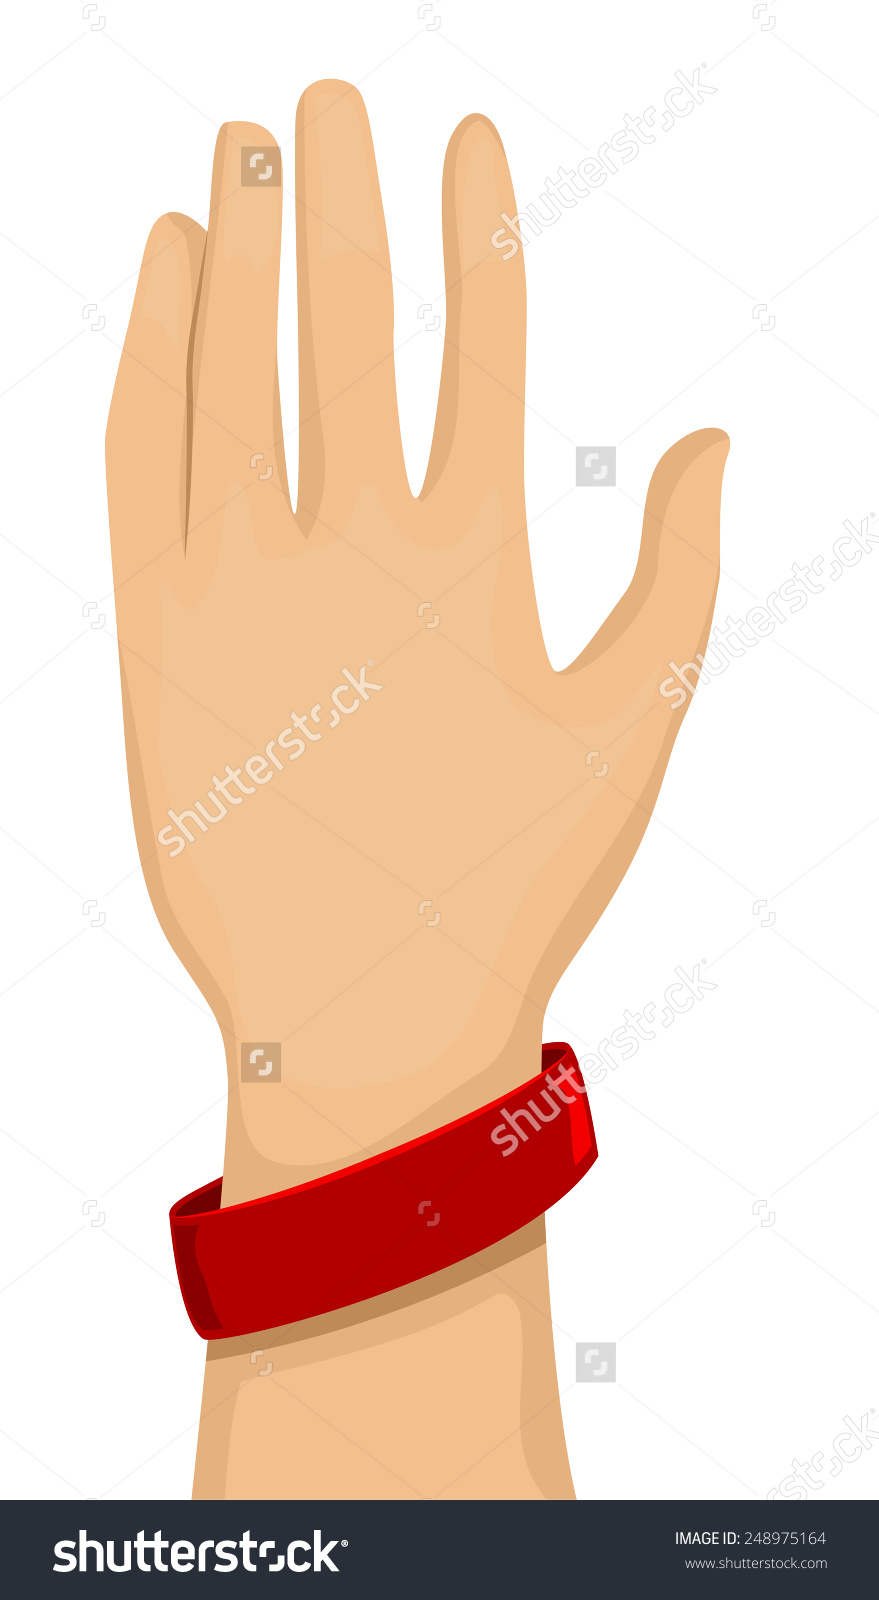 Cropped Illustration Arm Wearing Red Baller Stock Vector 248975164.